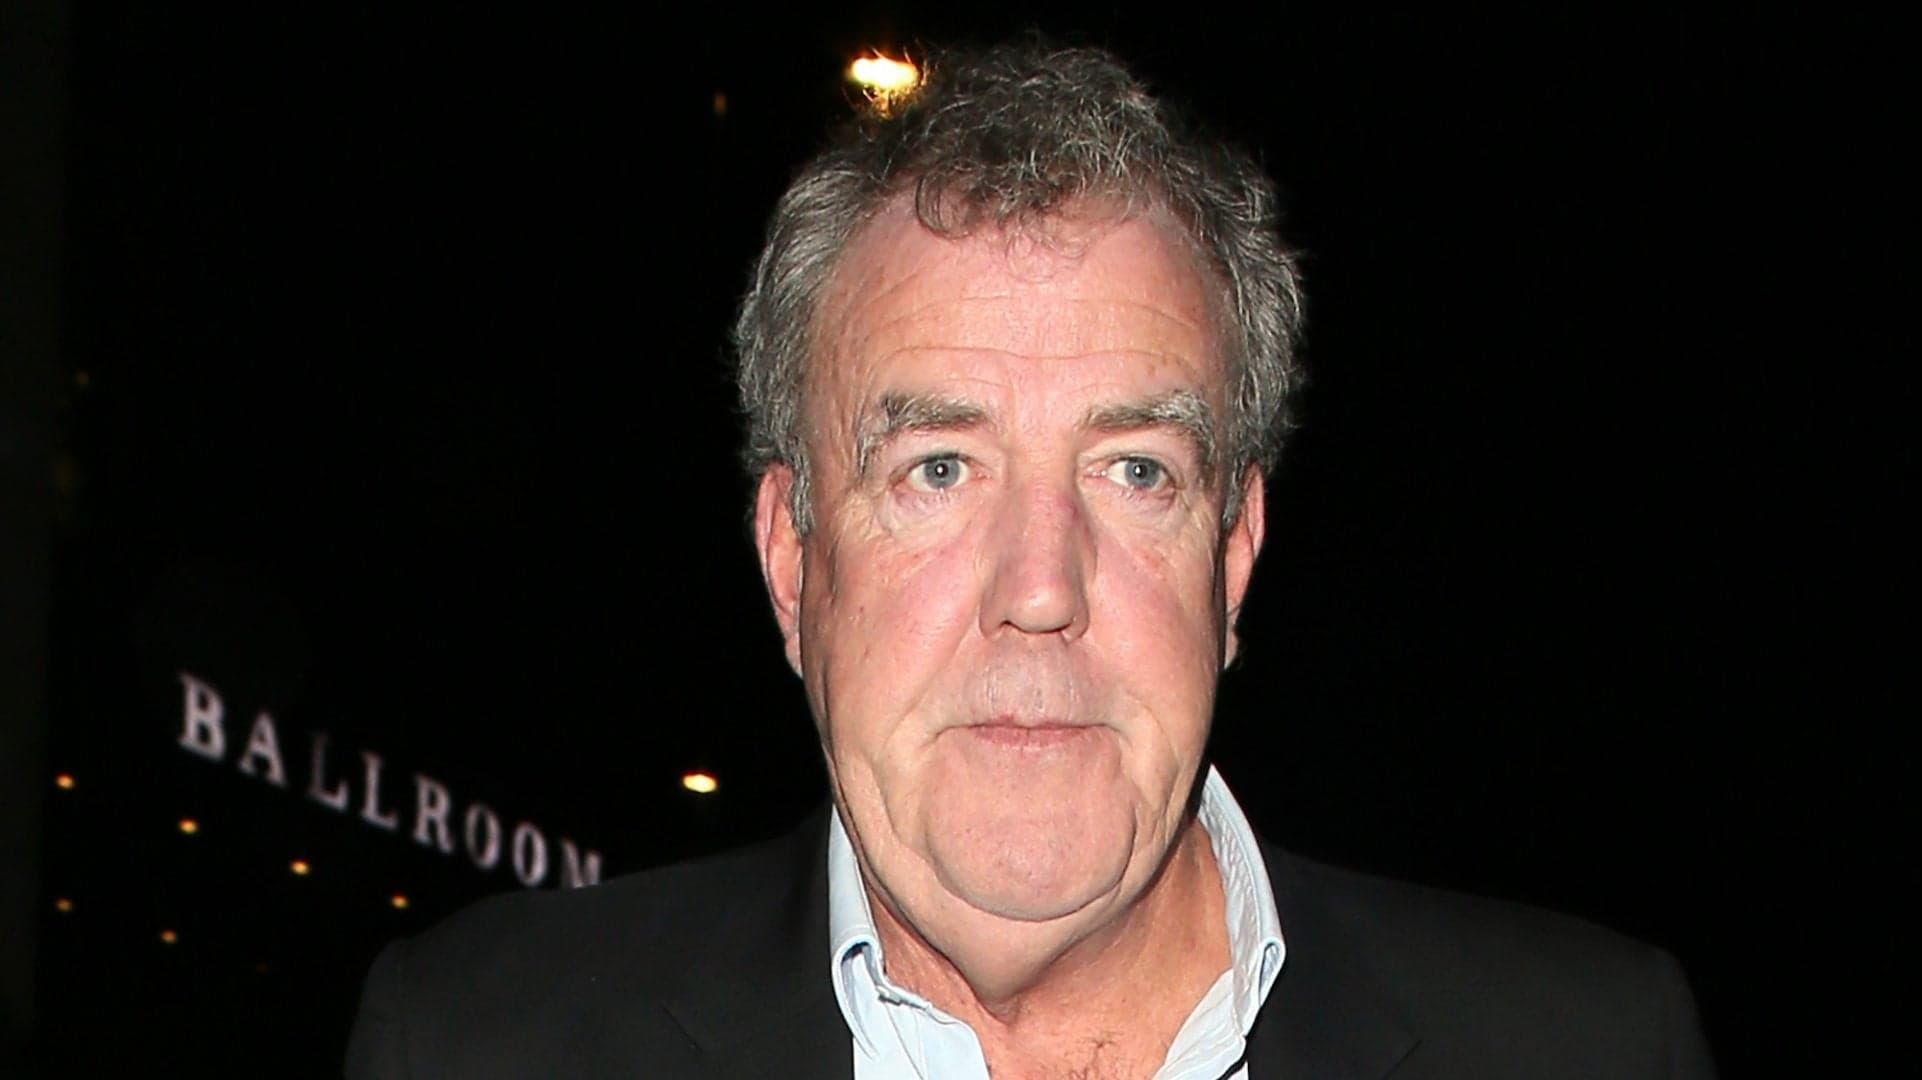 Tongue-in-Cheek Amazon Job Listing Suggests Jeremy Clarkson Being Temporarily Replaced